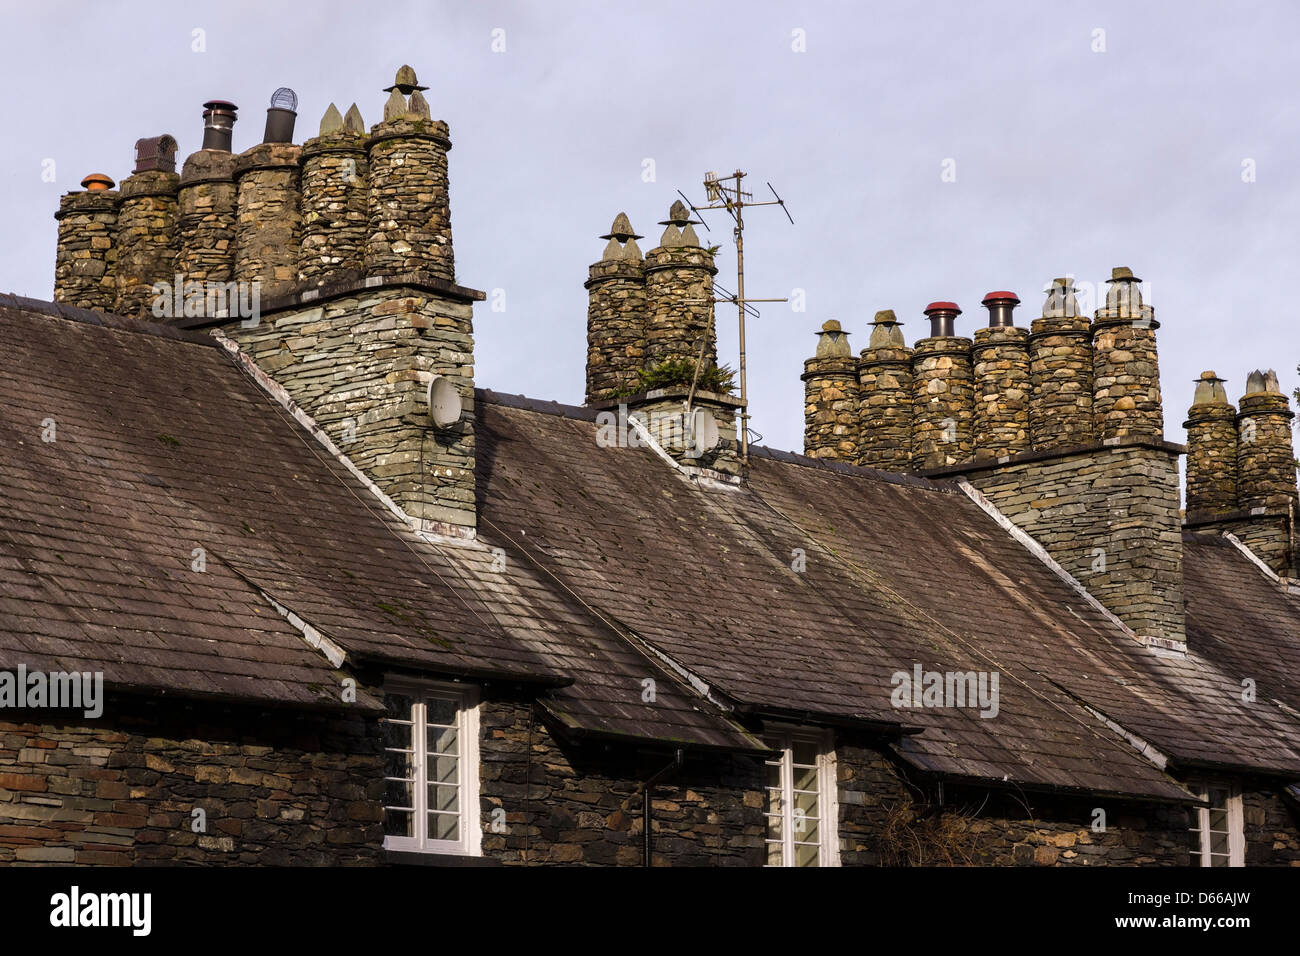 Slate dry stone square chimney stacks and round pots above terraced lakeland cottage roofs, Skelwith, Cumbria, England, UK Stock Photo